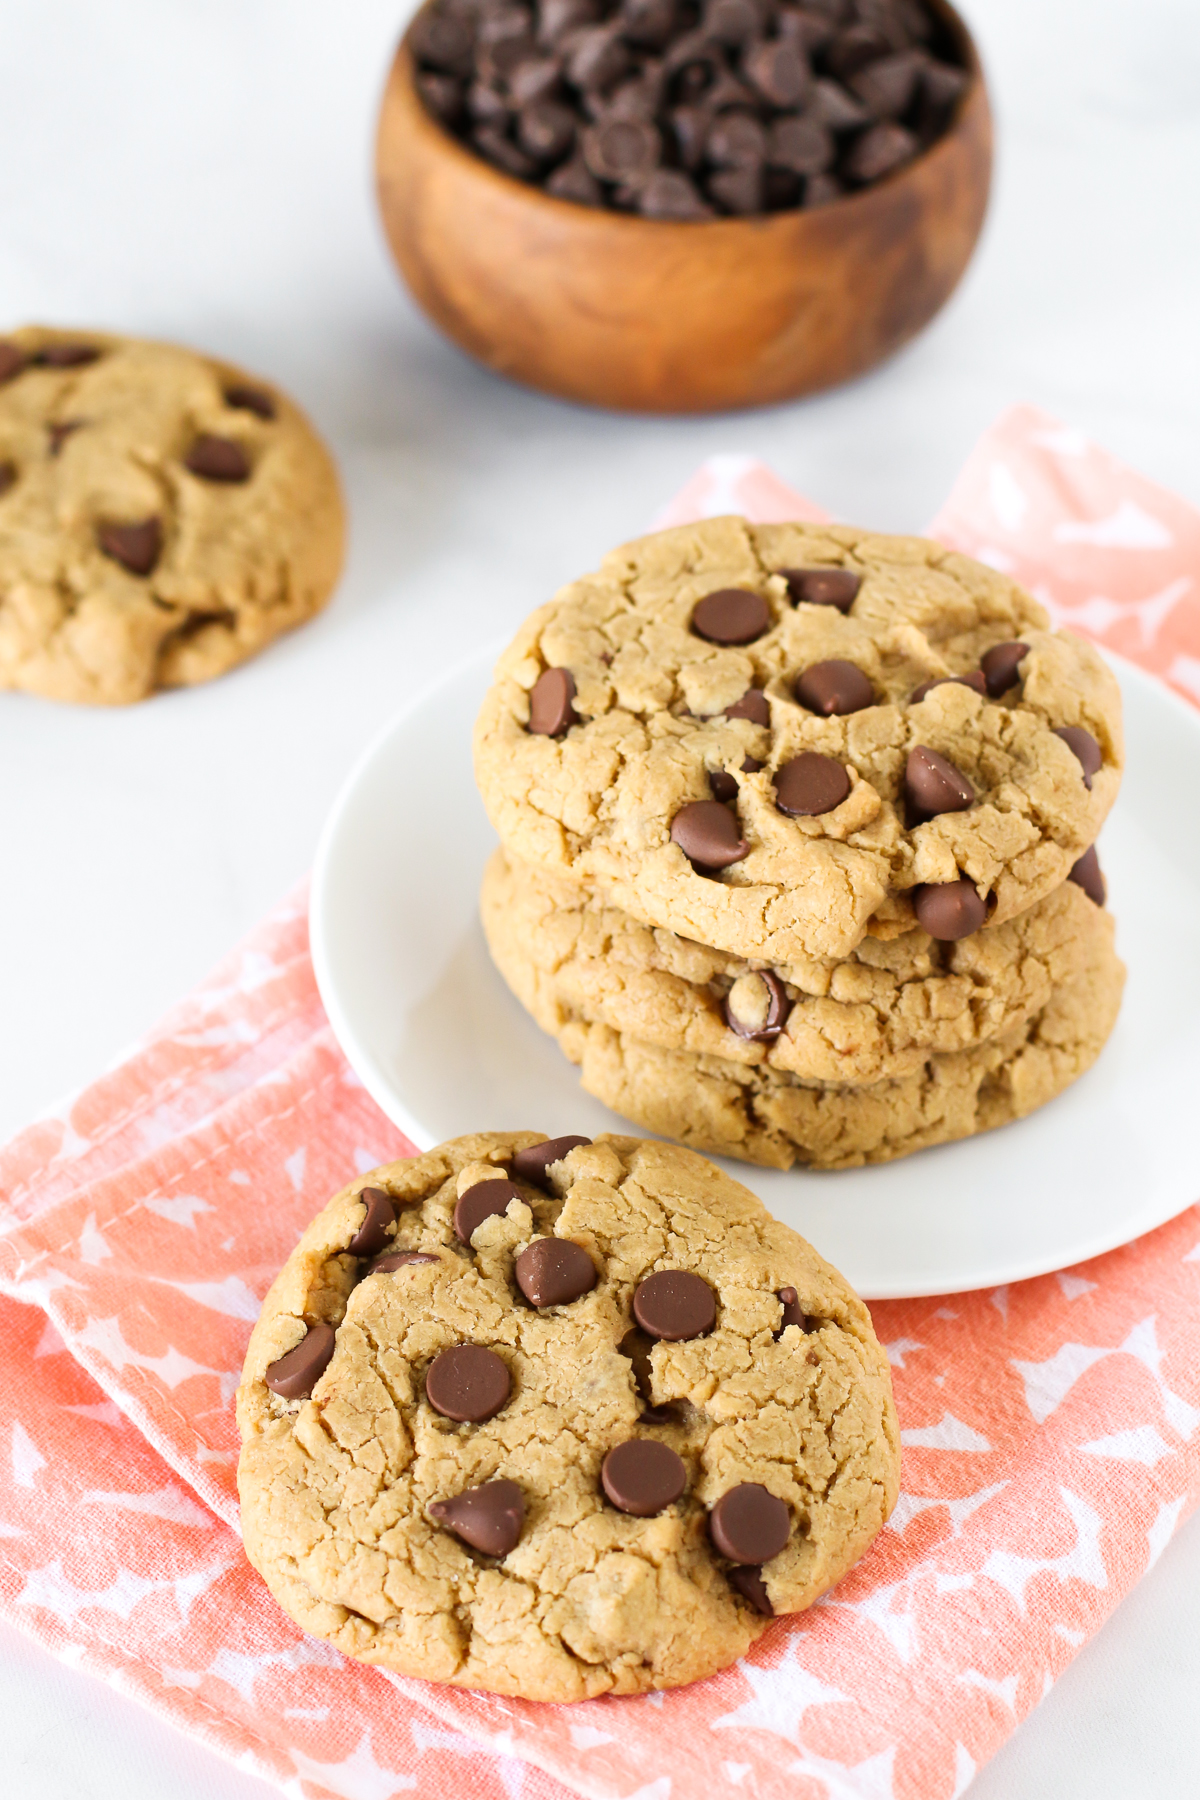 Gluten-Free Peanut Butter Chocolate Chip Cookies (Dairy-Free